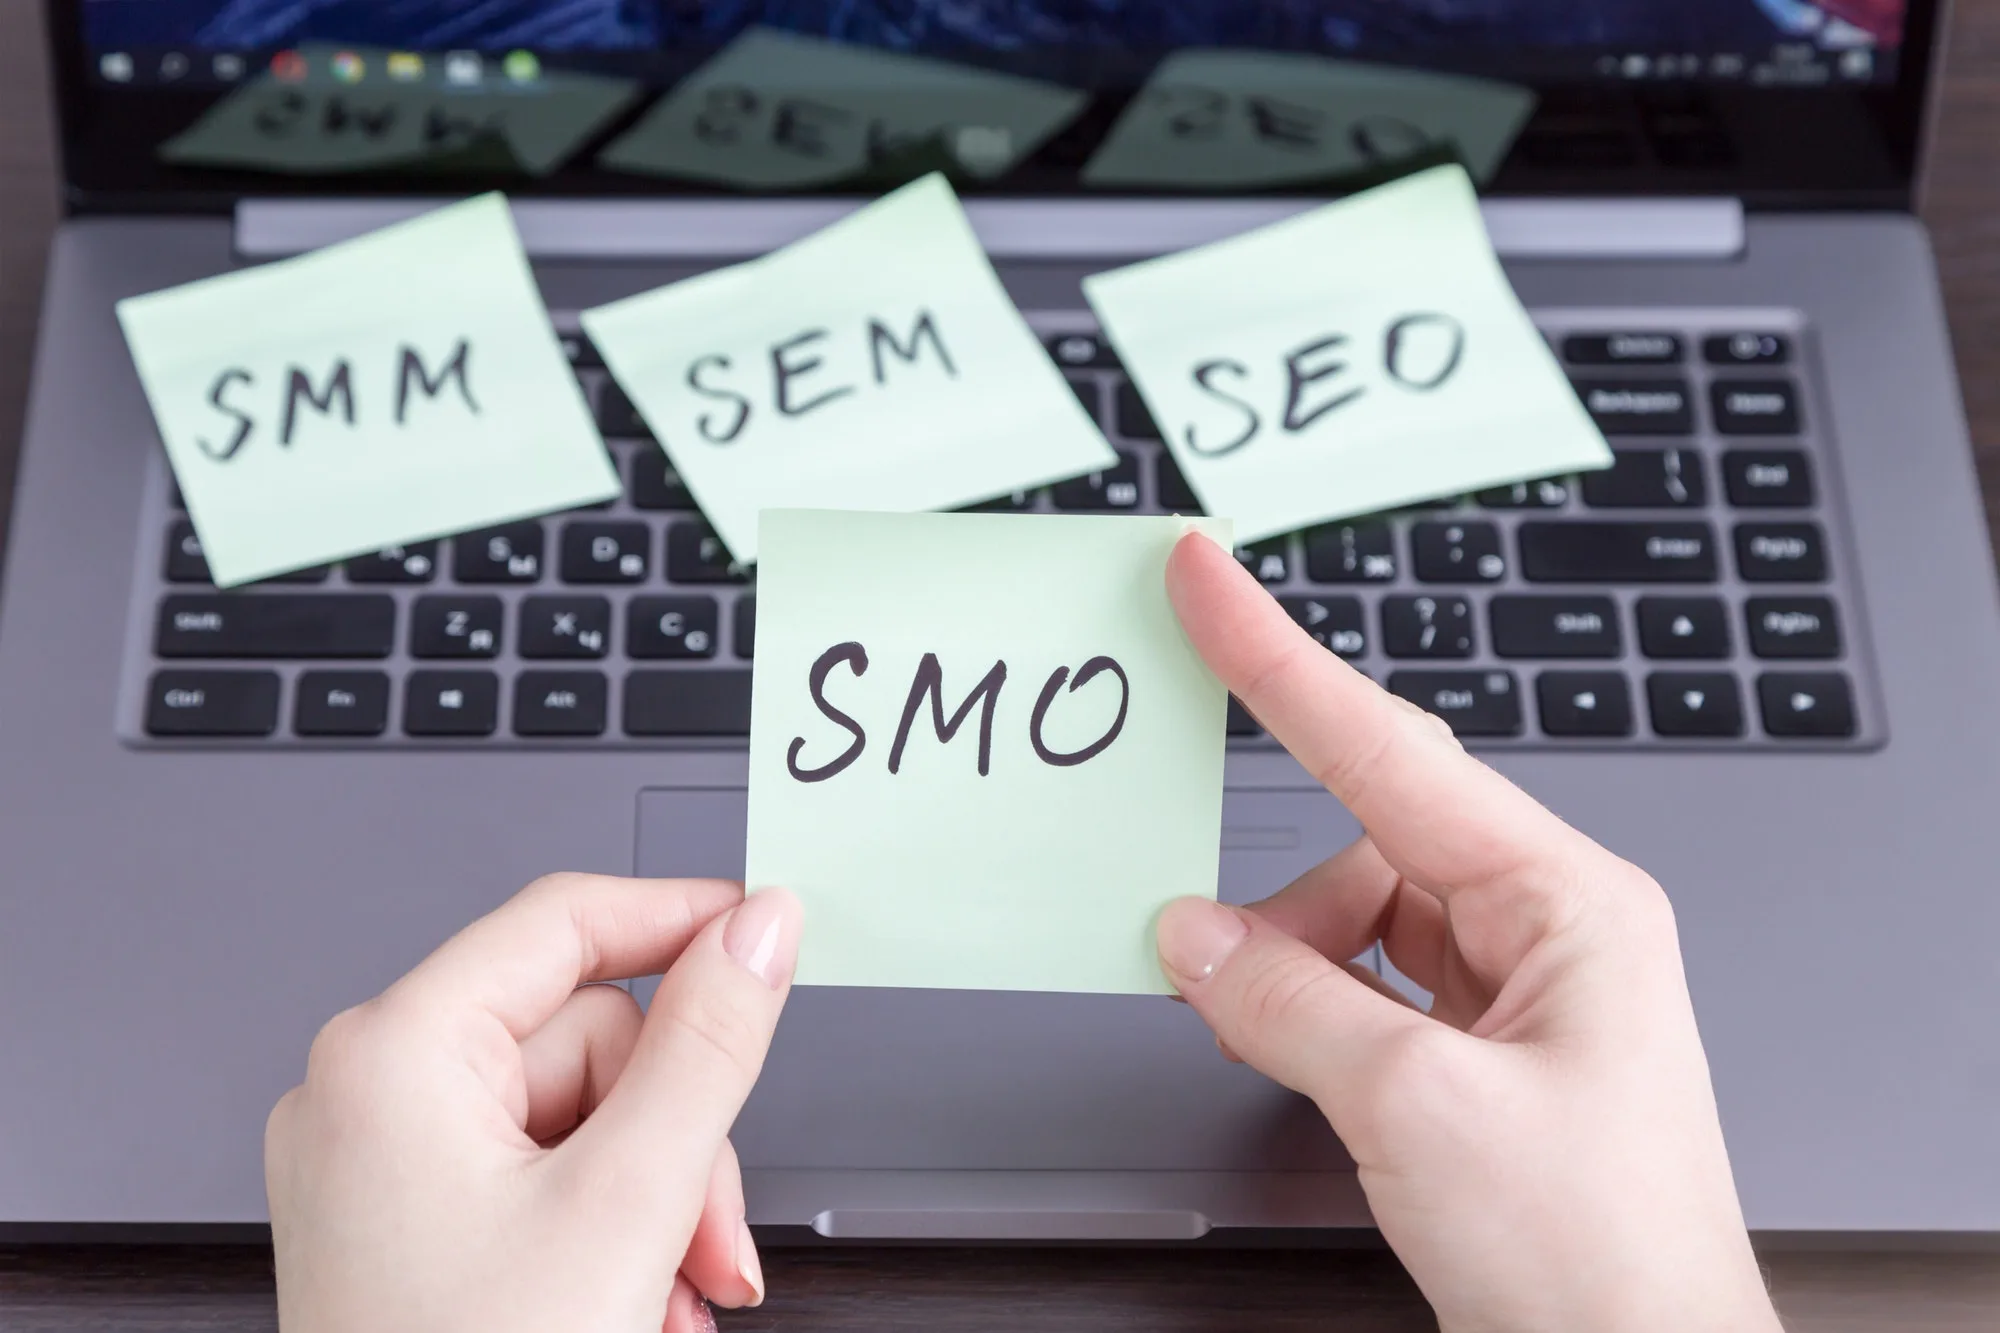 Organic vs Paid: Hire The Top for SEO, SEM, SMO, SMM & PPC